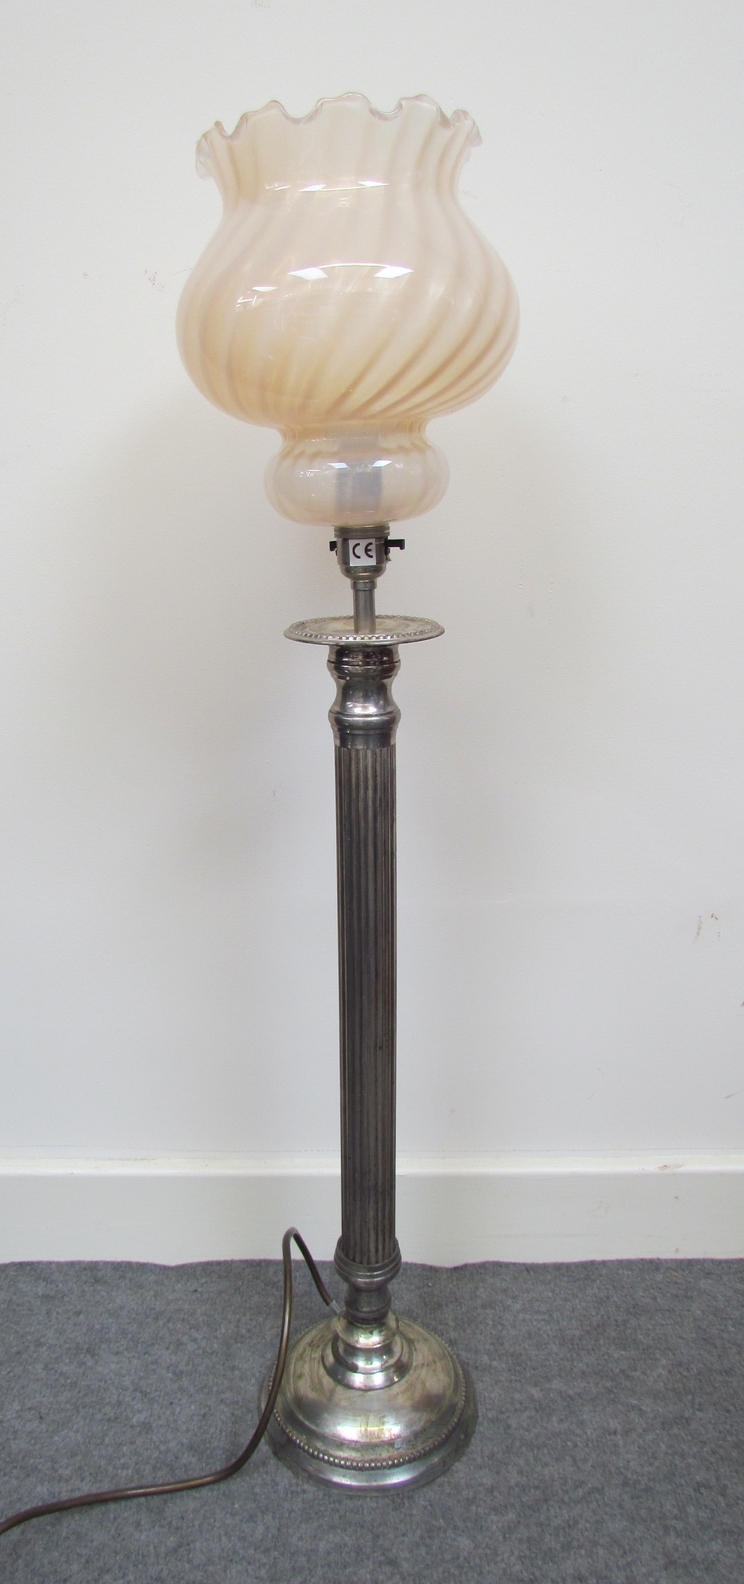 A silver plated Corinthian column table lamp with pink swirl glass shade, 82cm tall